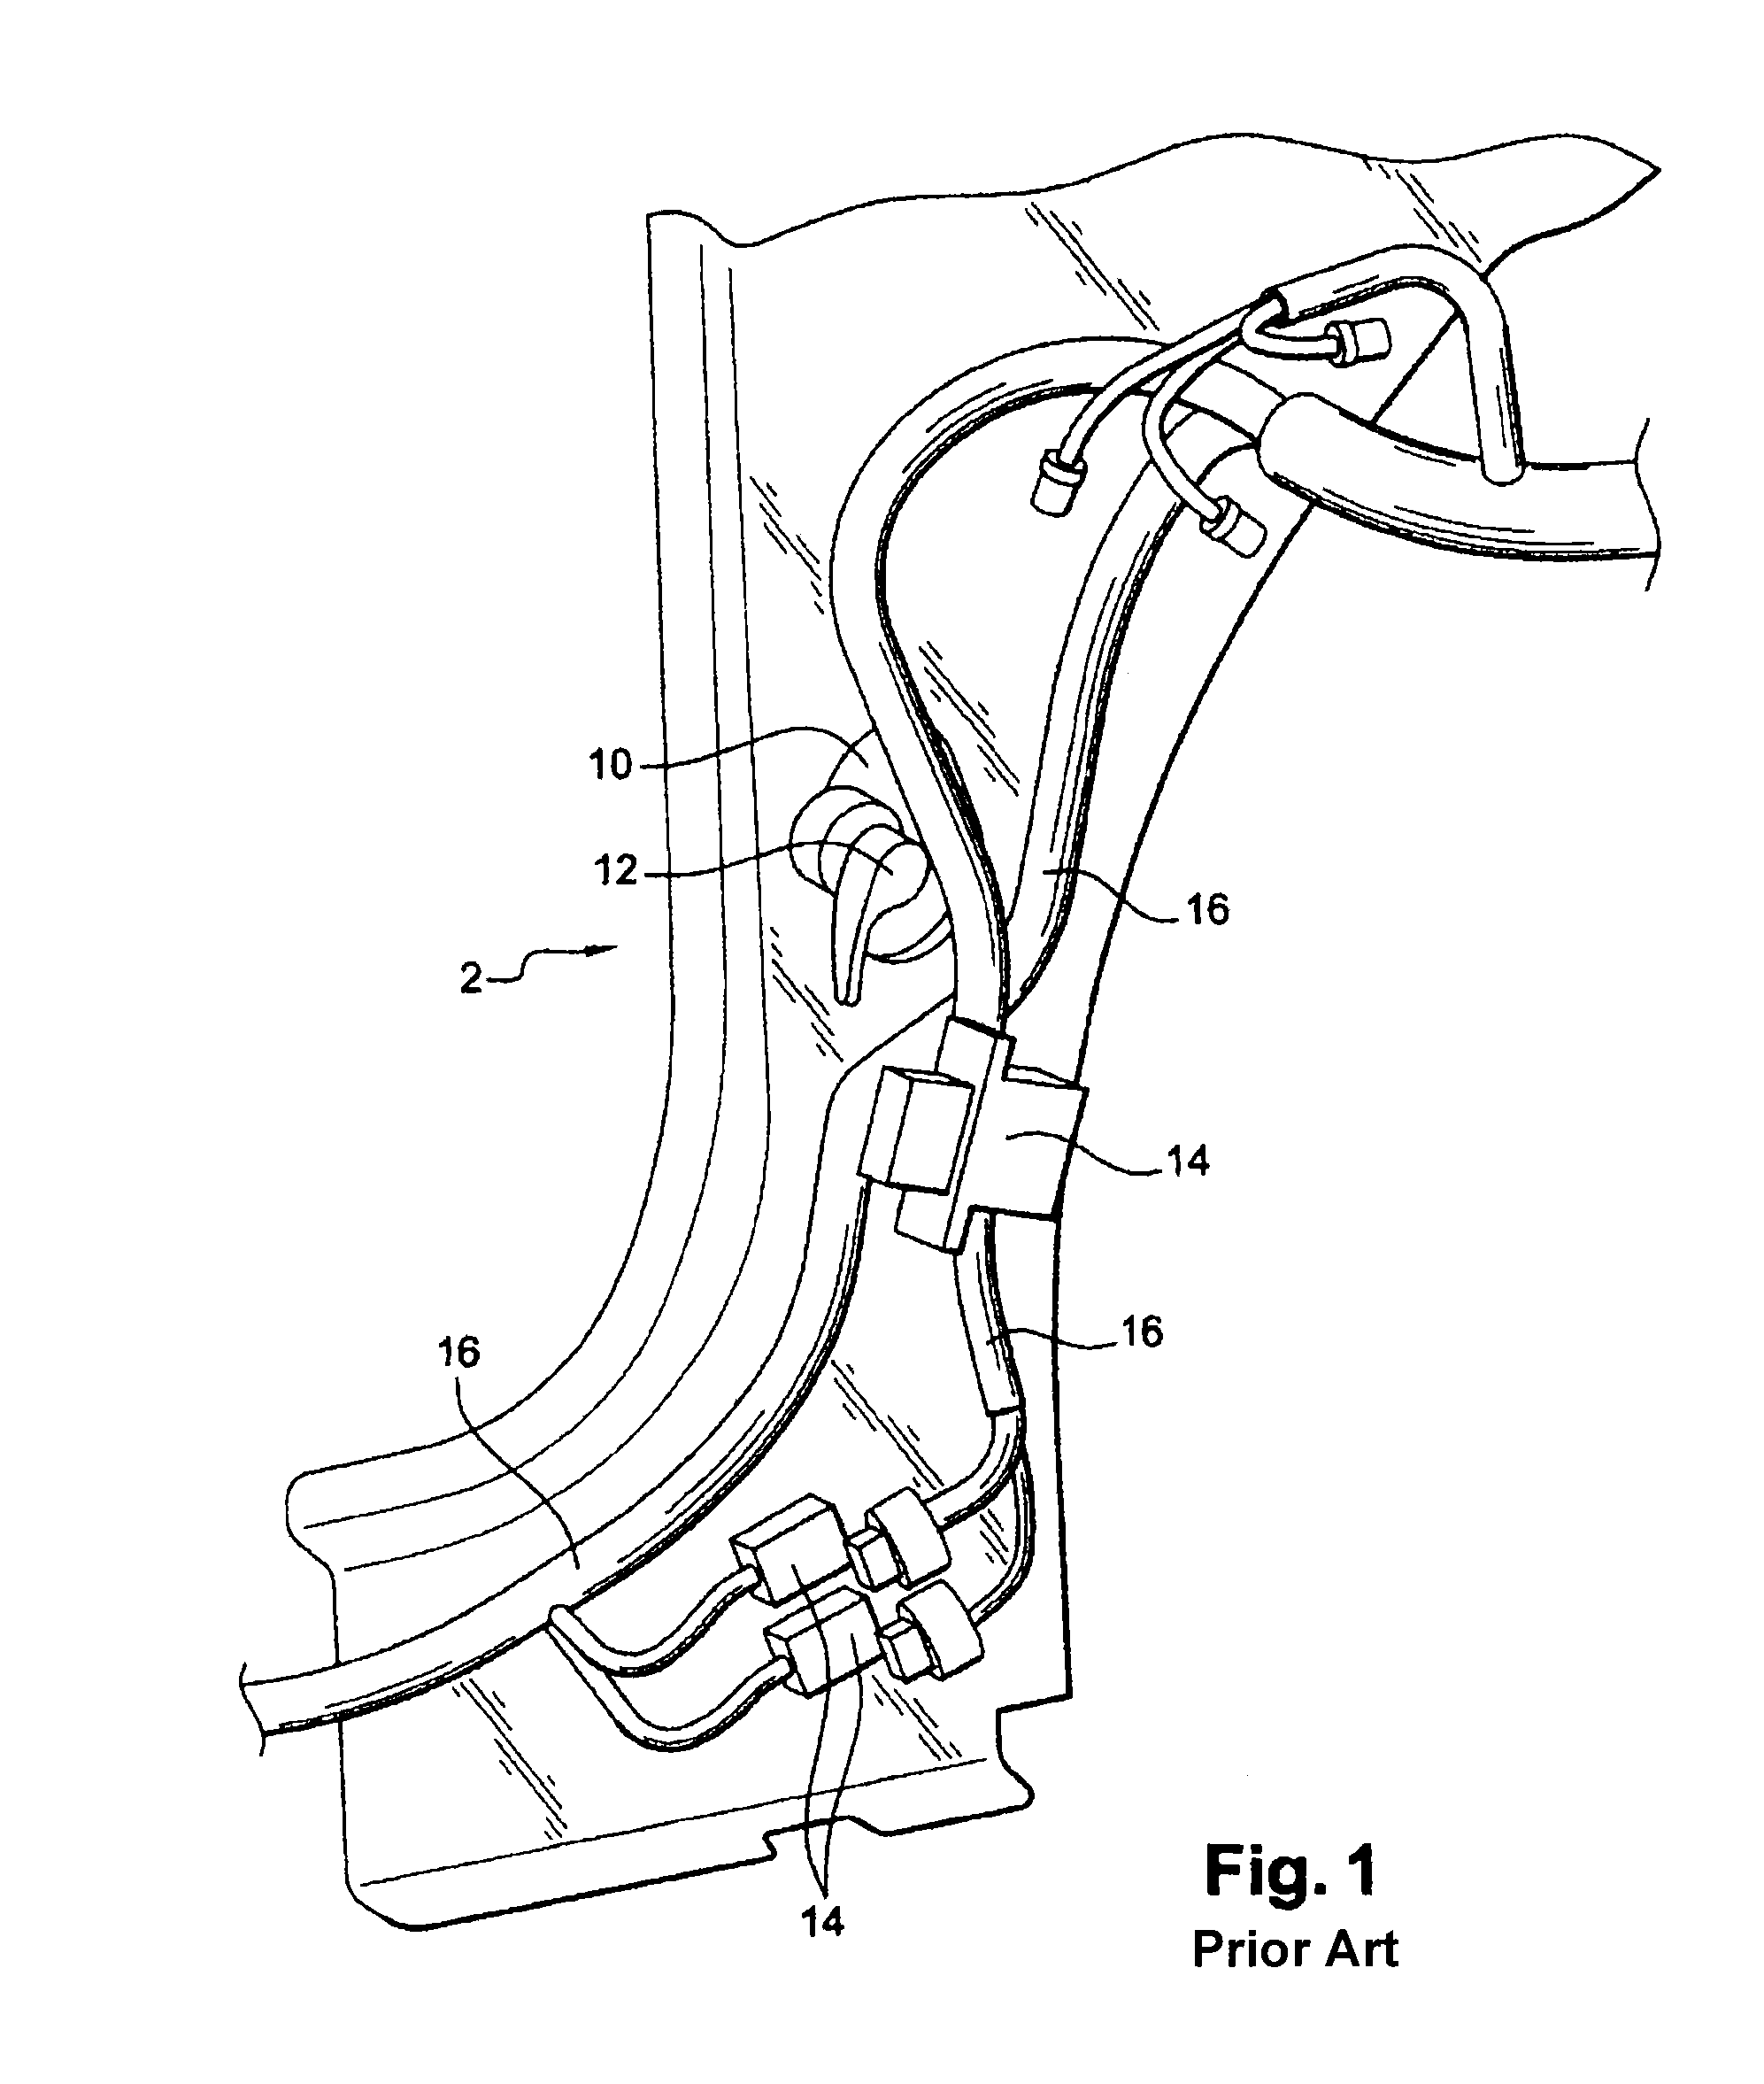 Support for one or more elements which are intended to be fastened to a motor vehicle structure